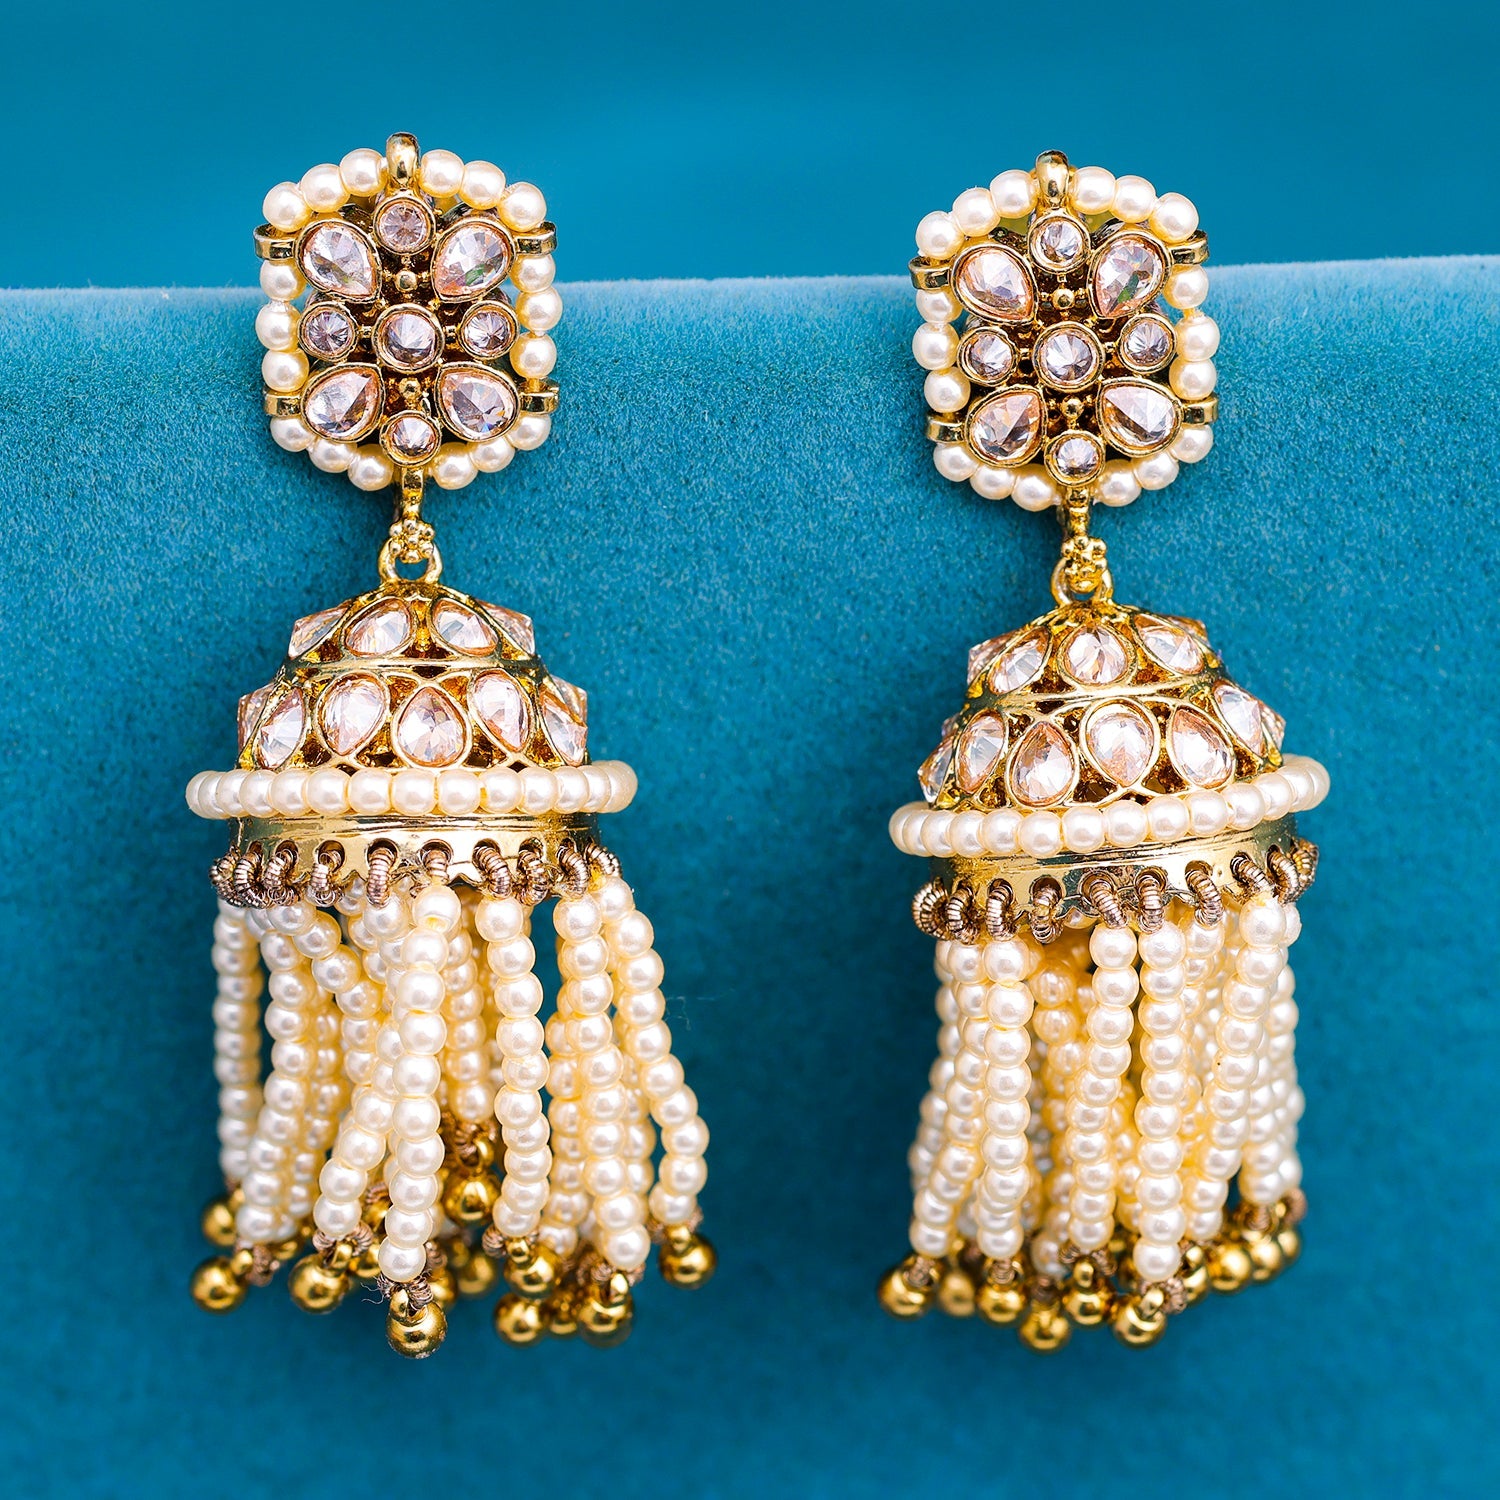 Cheap Accessories Indian Style Palace Earring with tassel Jhumka Earrings  Flower Bell Shape Pearl Beads  Joom